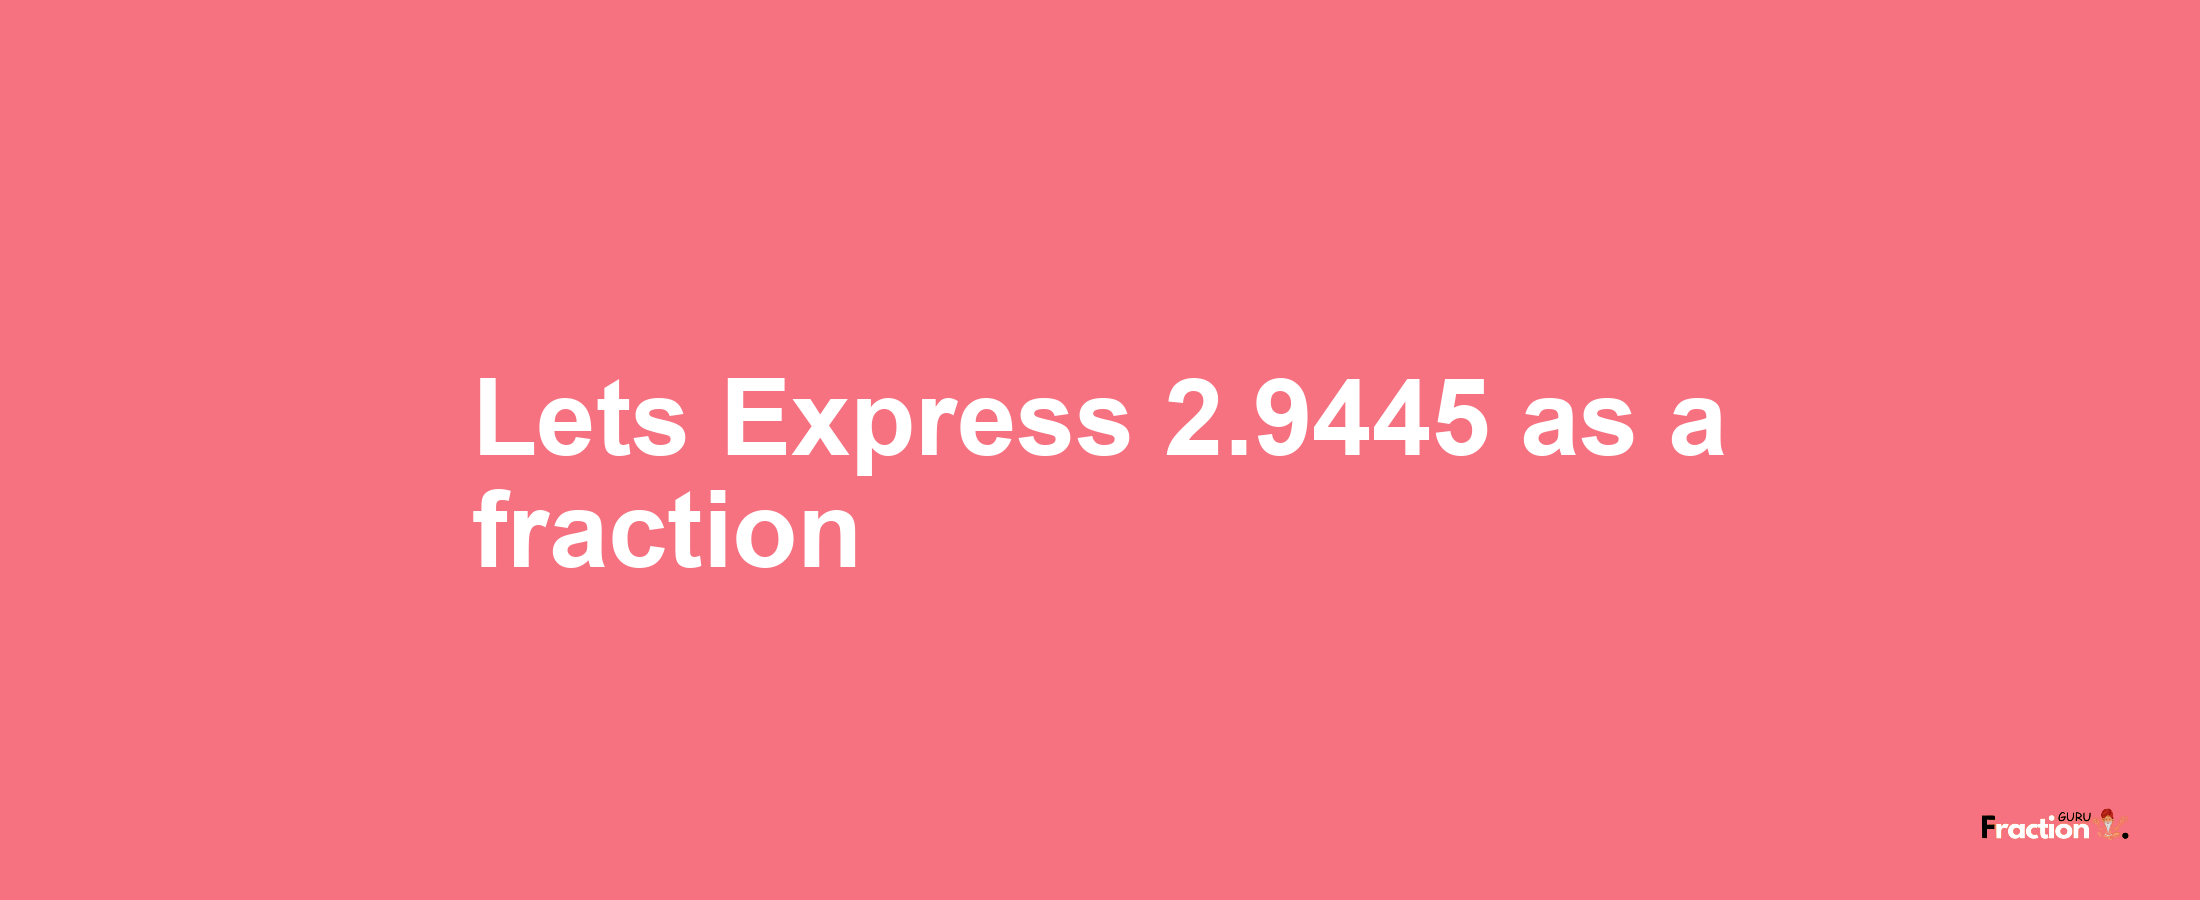 Lets Express 2.9445 as afraction